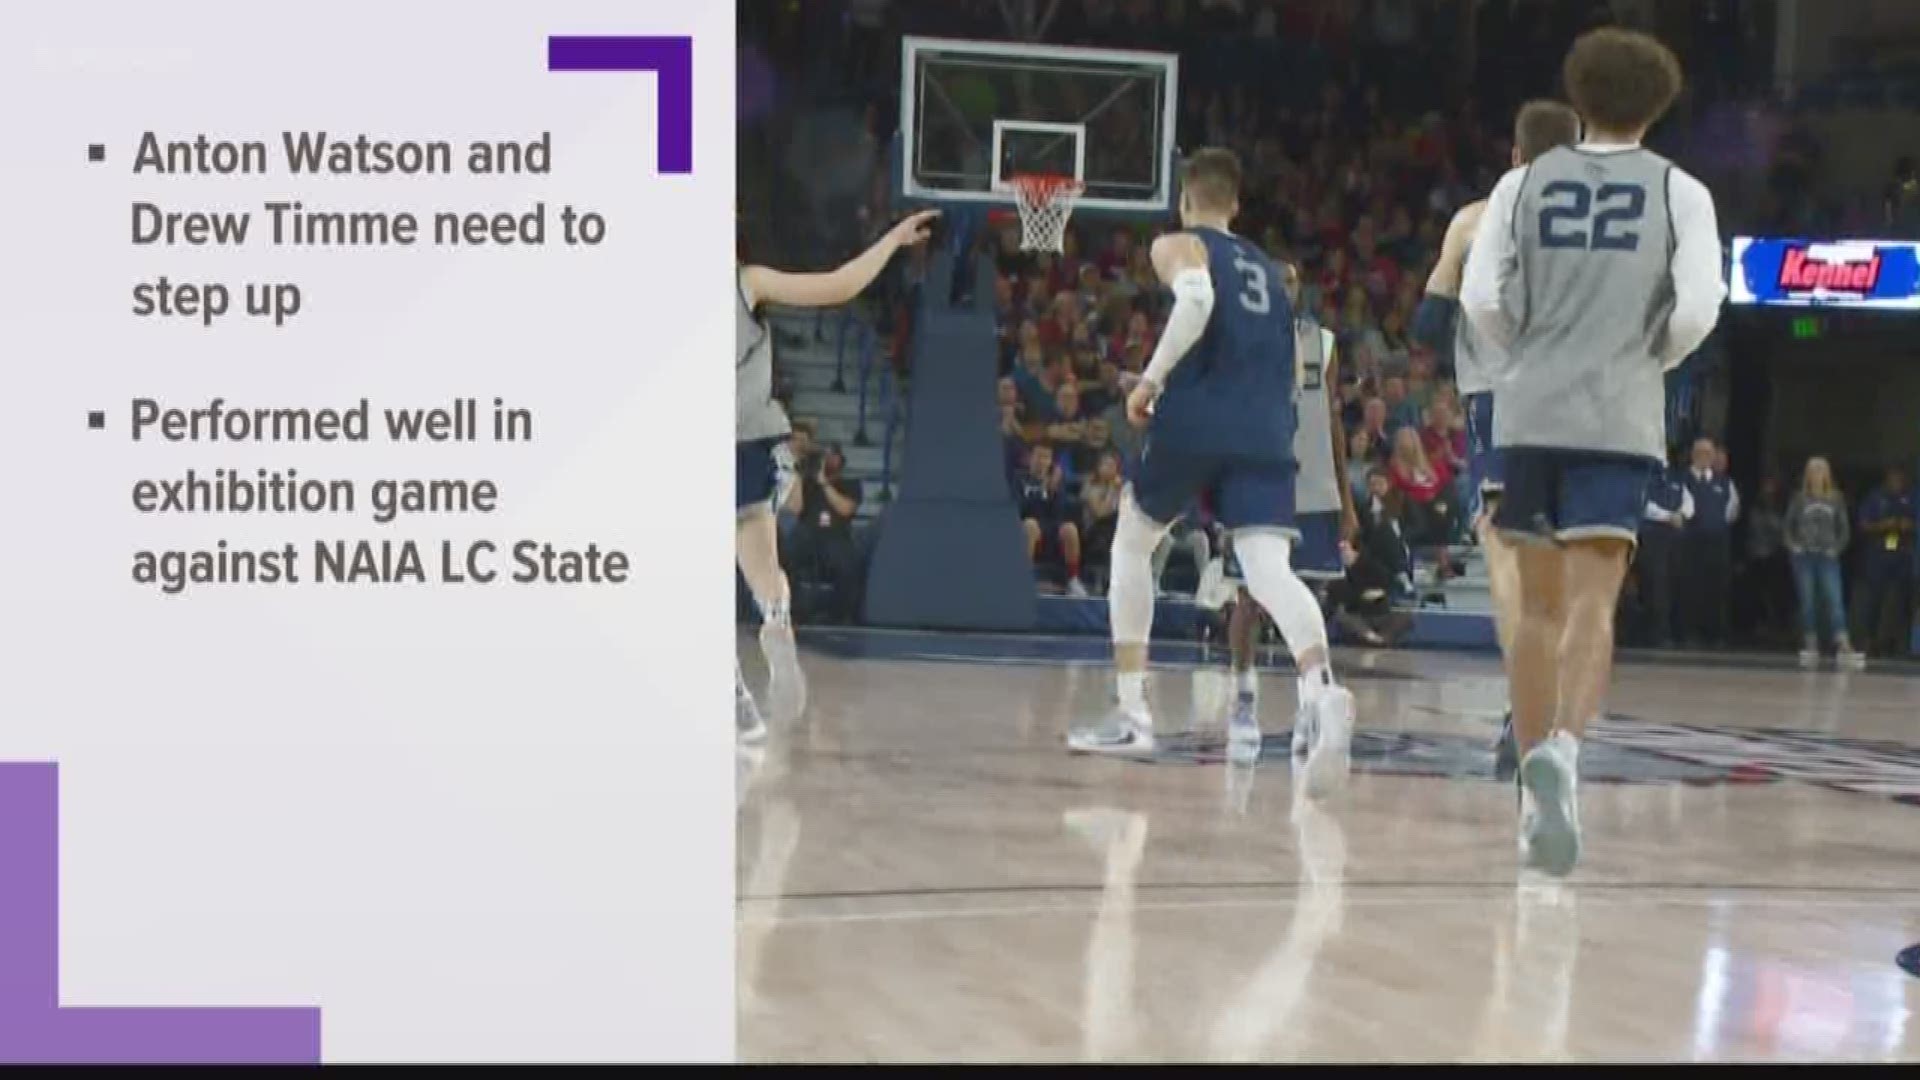 Fans at Gonzaga's Tuesday game saw a very different team on the court compared to last year's Elite Eight squad, but expectations remain high.